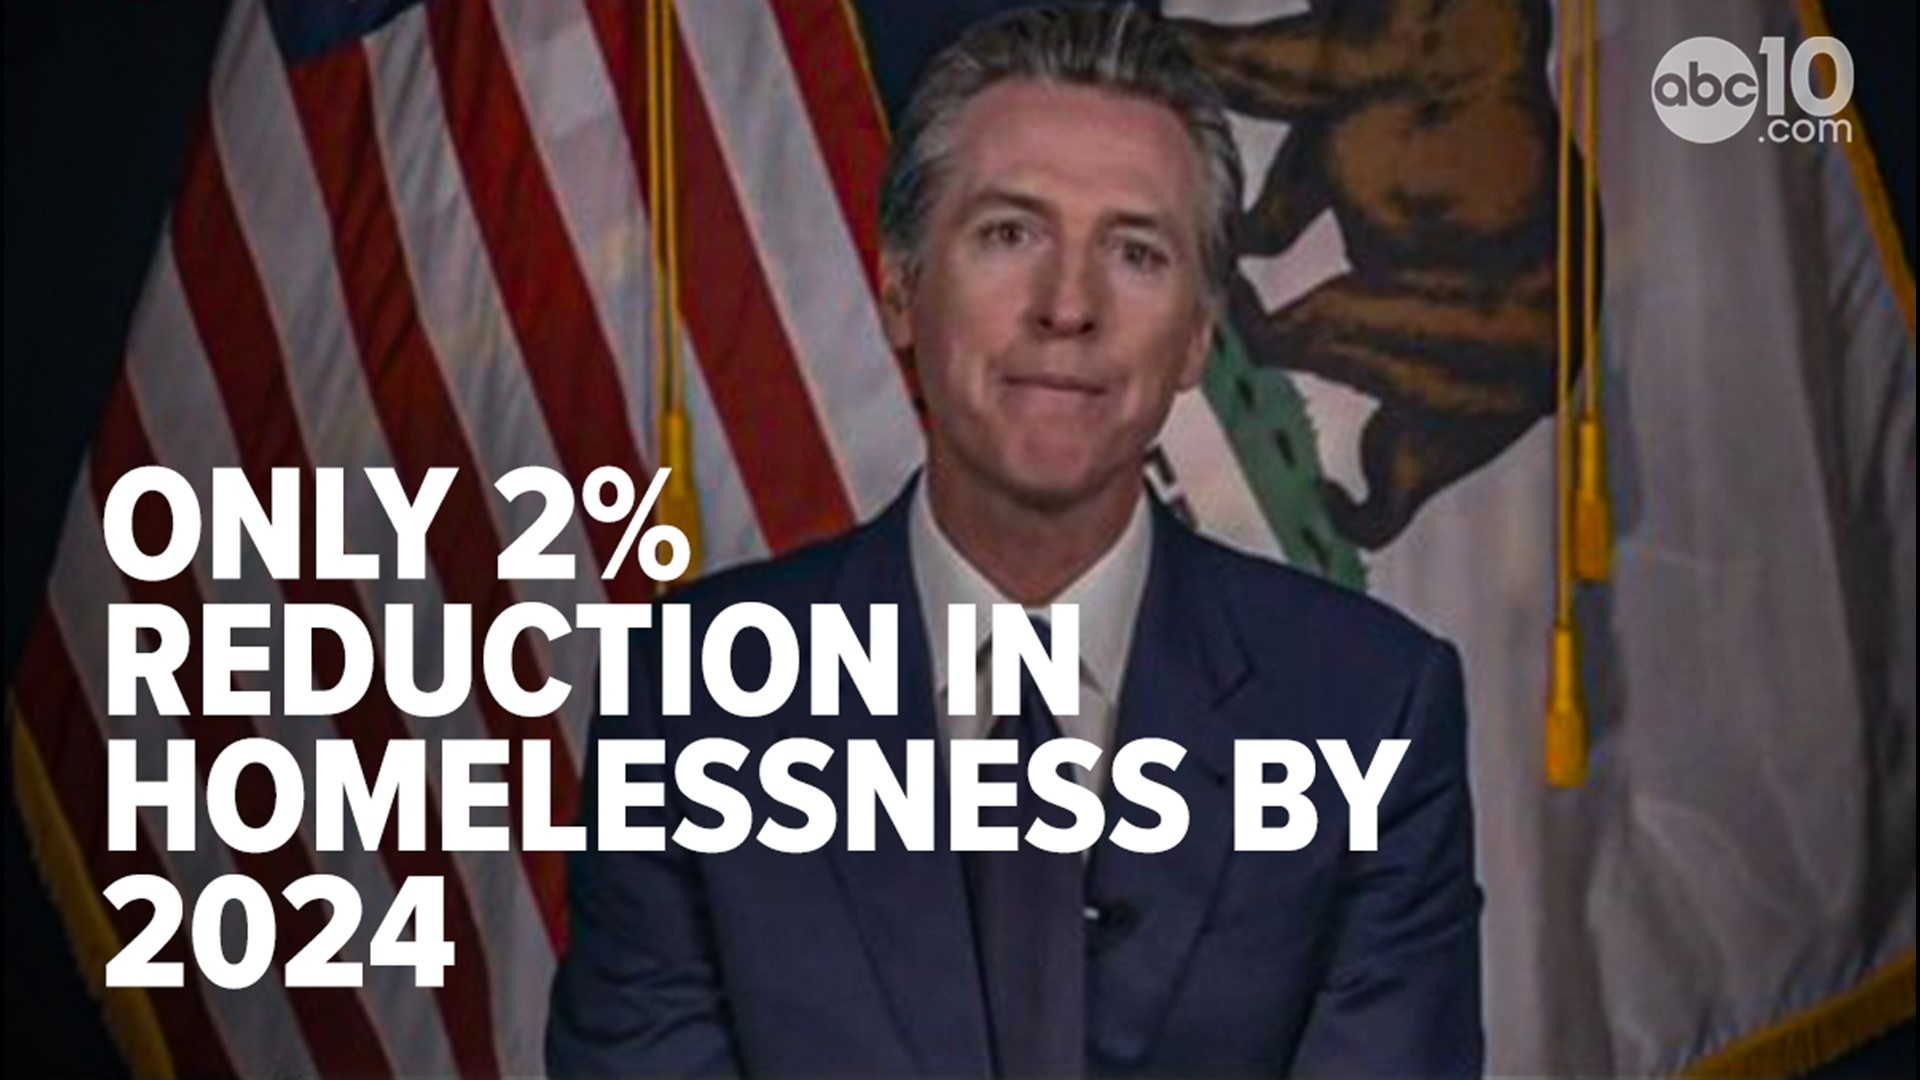 After Gov. Gavin Newsom announced he's withholding a 3rd round of homelessness services funding worth $1 billion, nonprofits sounded the alarm bells.